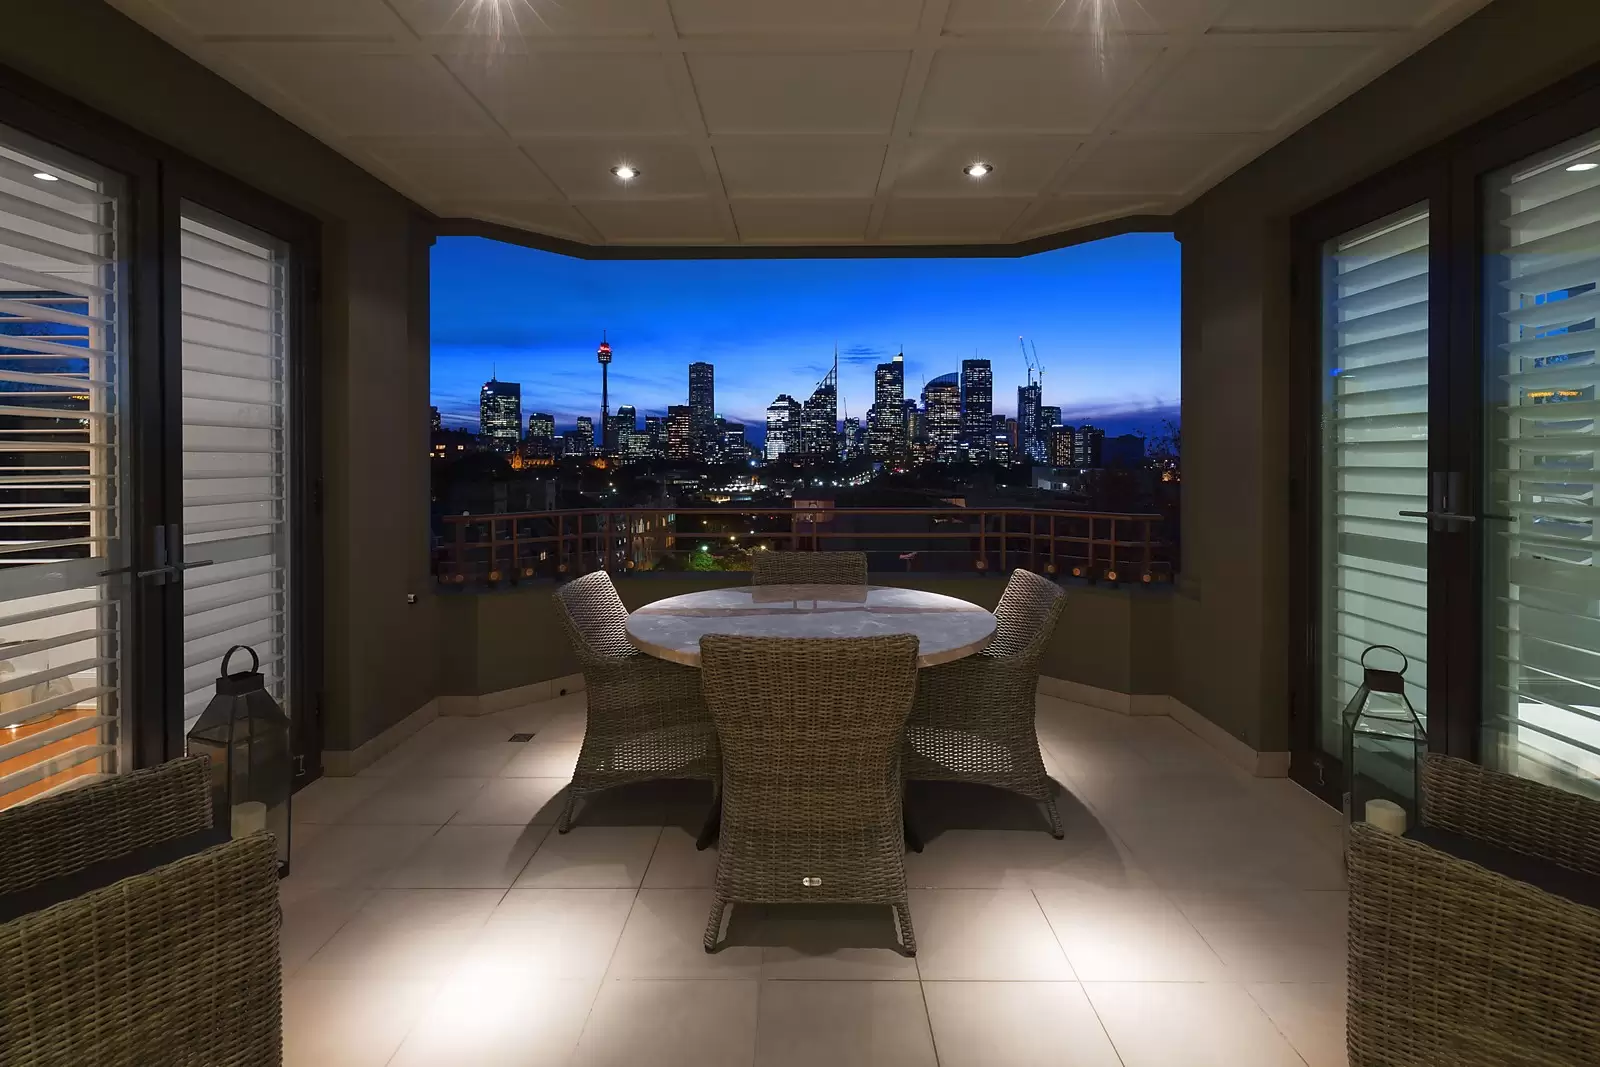 Photo #8: 602/14 Macleay Street, Potts Point - Sold by Sydney Sotheby's International Realty